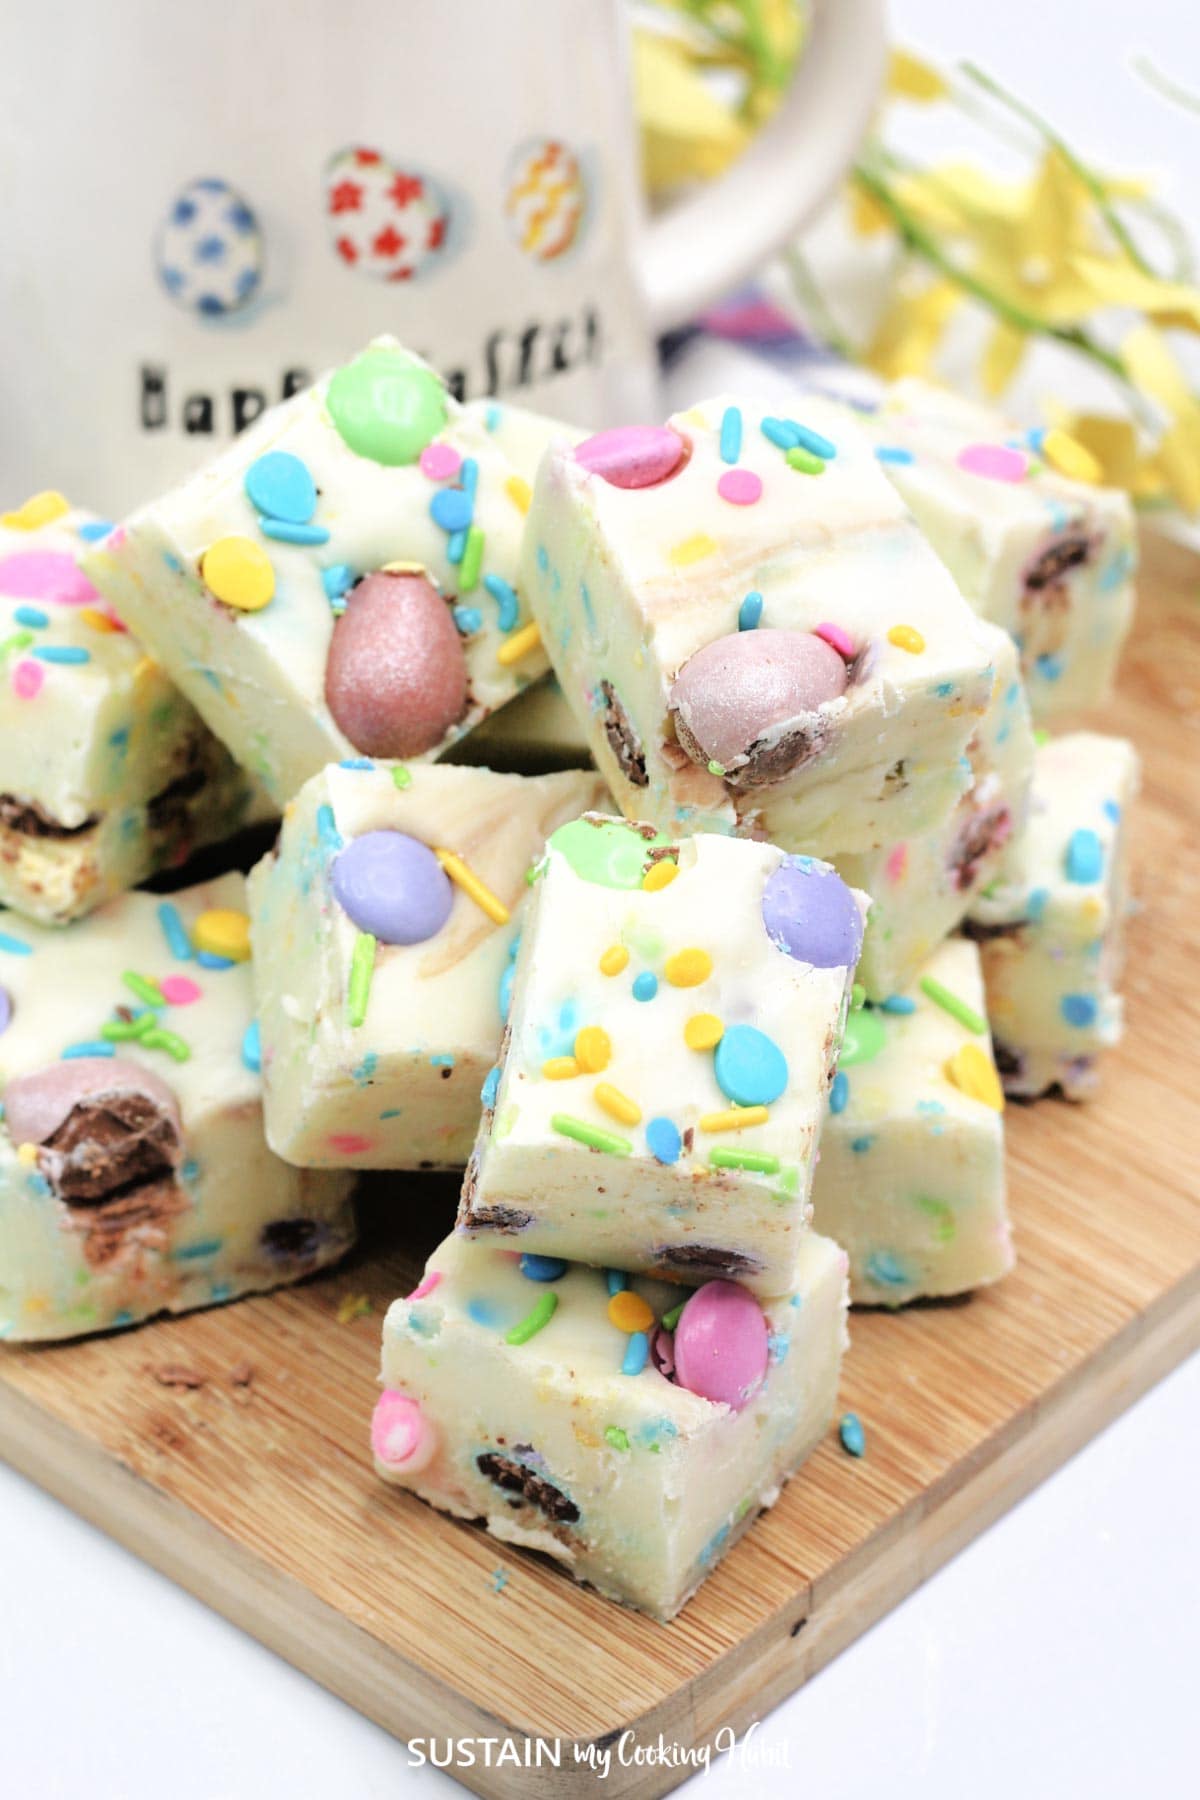 White chocolate Easter fudge loaded with colorful sprinkles, chocolate eggs and M&Ms.